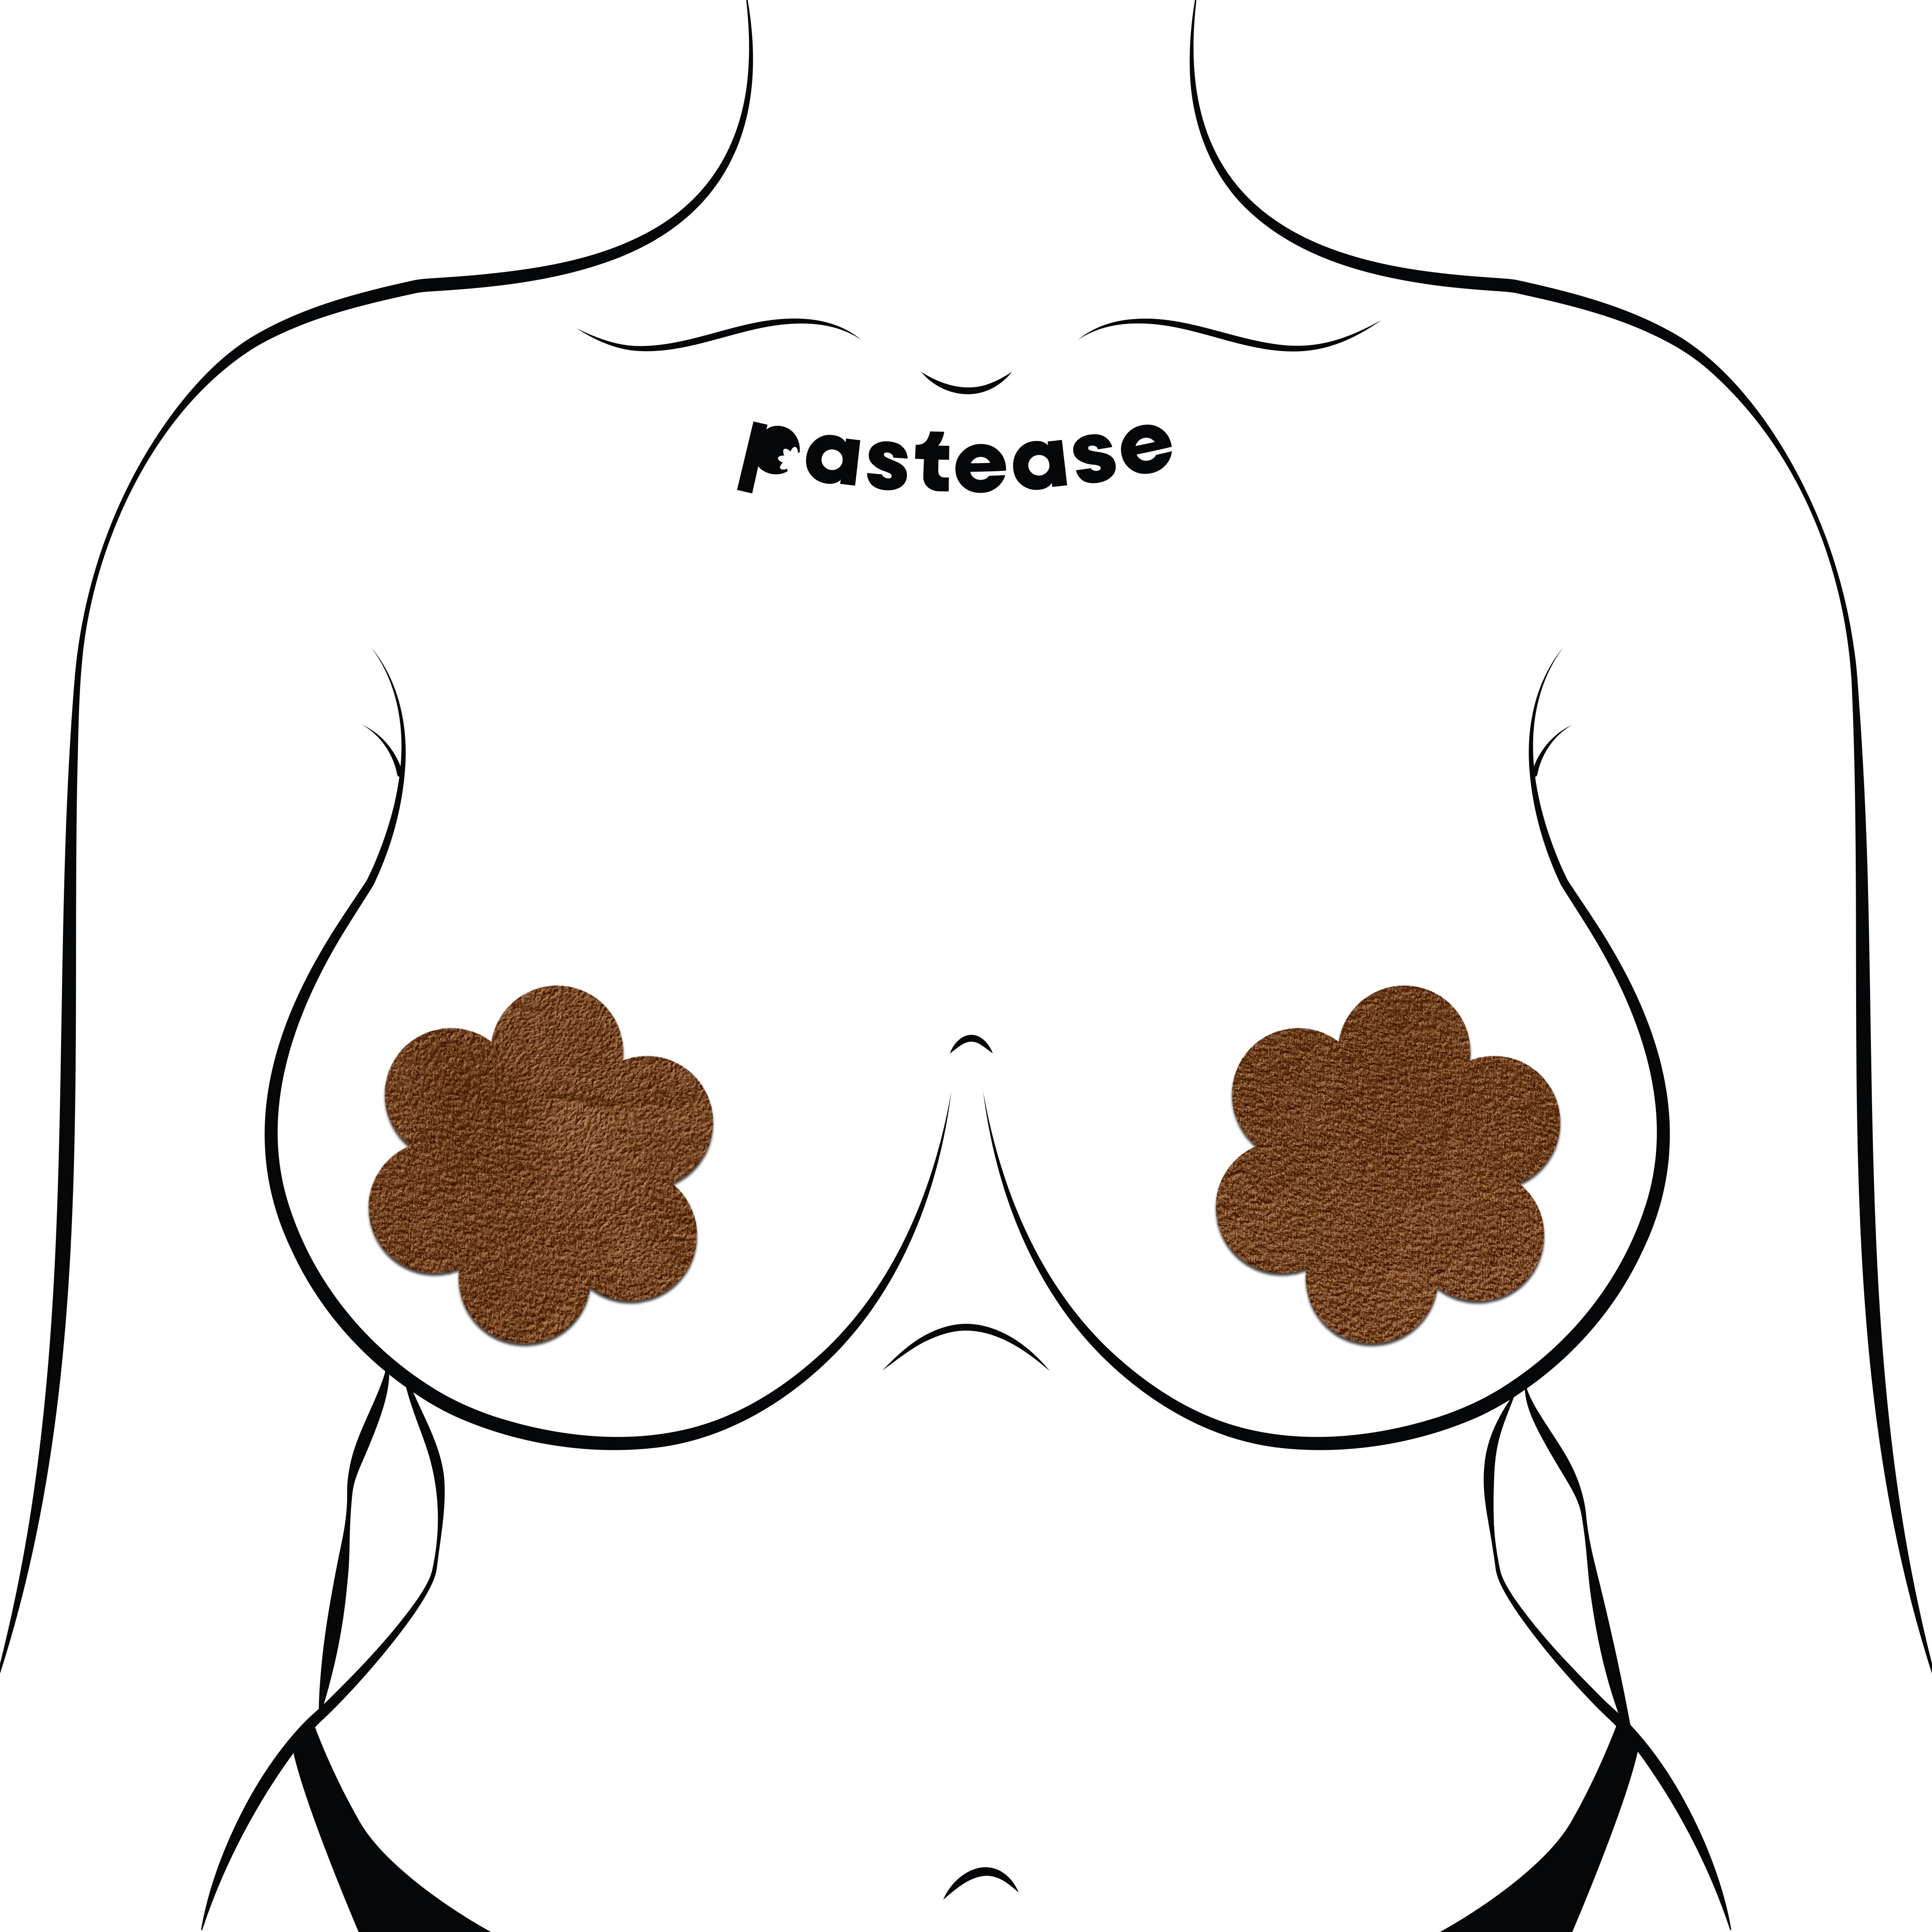 5-Pack: Reusable Pasties: Cocoa Dark Brown Nude Vegan Suede Flower Reusable Nipple Covers by Pastease Everyday™ o/s